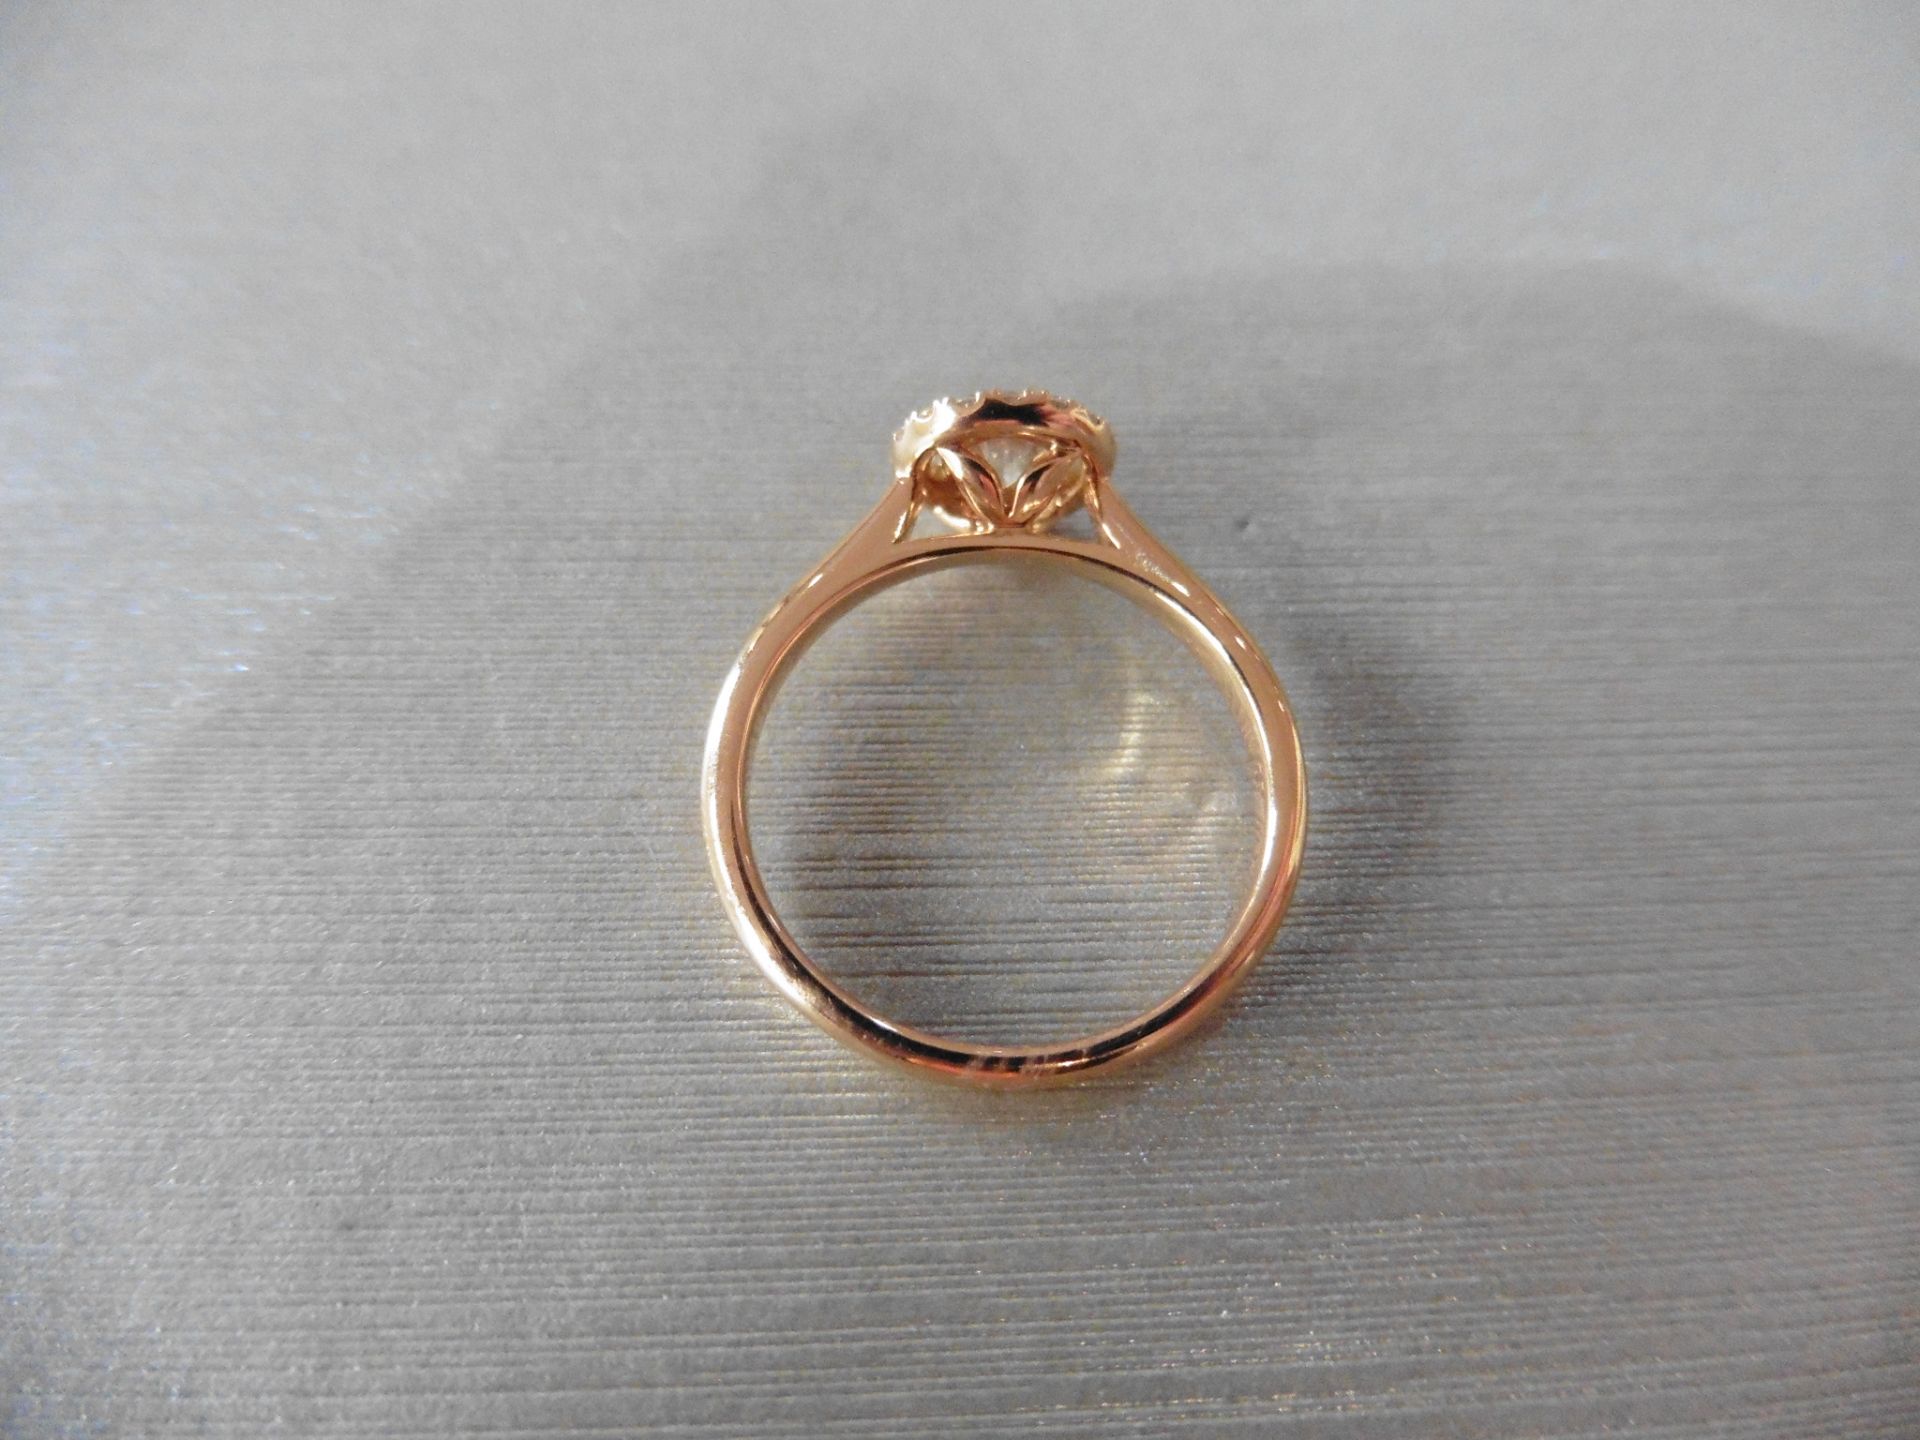 Brand new 18ct rose gold diamond set ring with a 0.30ct brilliant cut diamond, I/J colour which is - Image 2 of 4